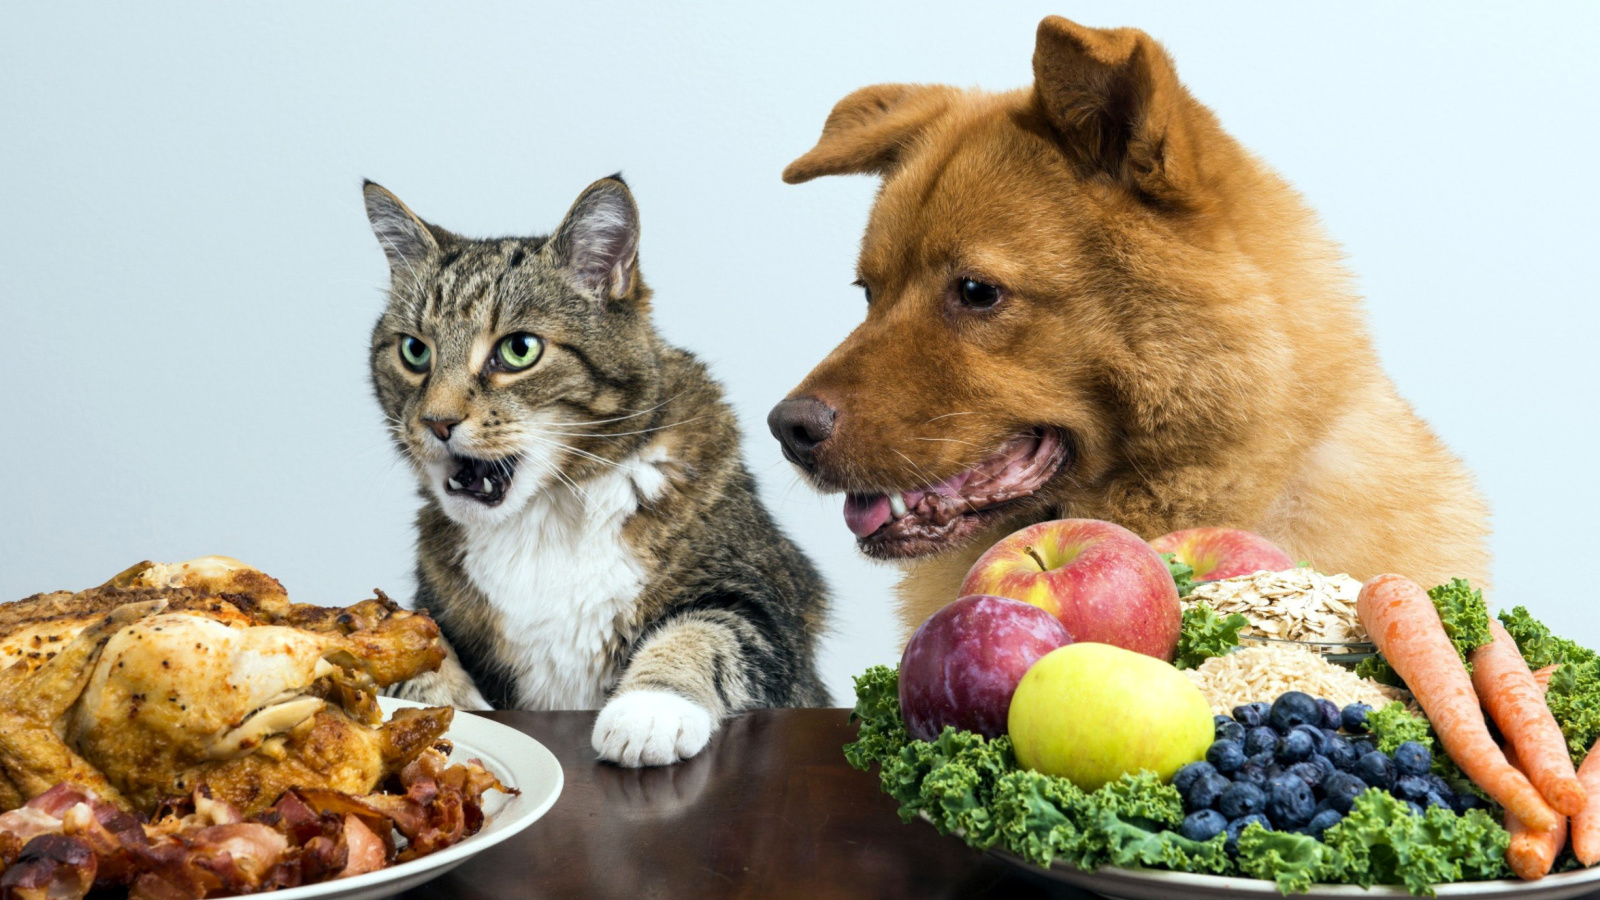 Dog and Cat Dinner wallpaper 1600x900